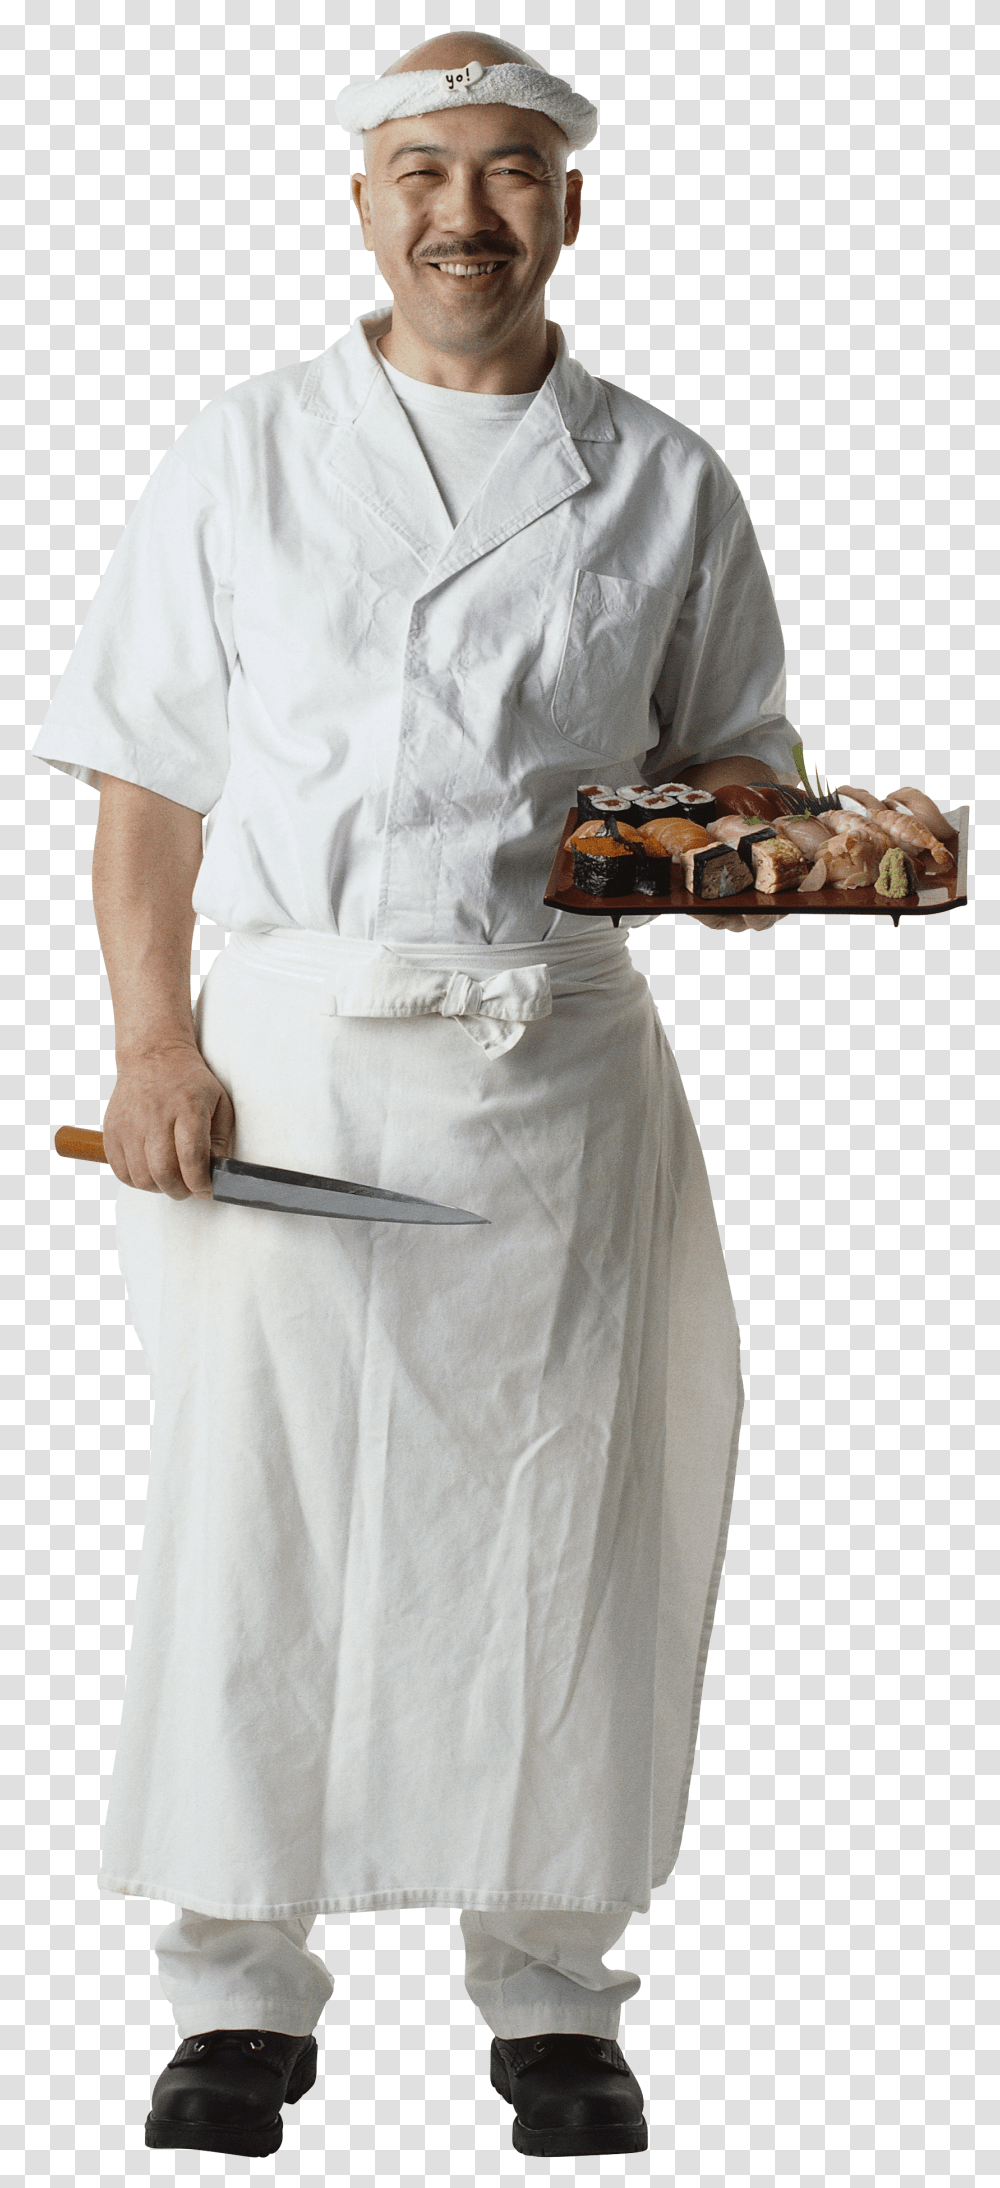 Chef Image Free Images Mugs Sushi Chef Transparent Png